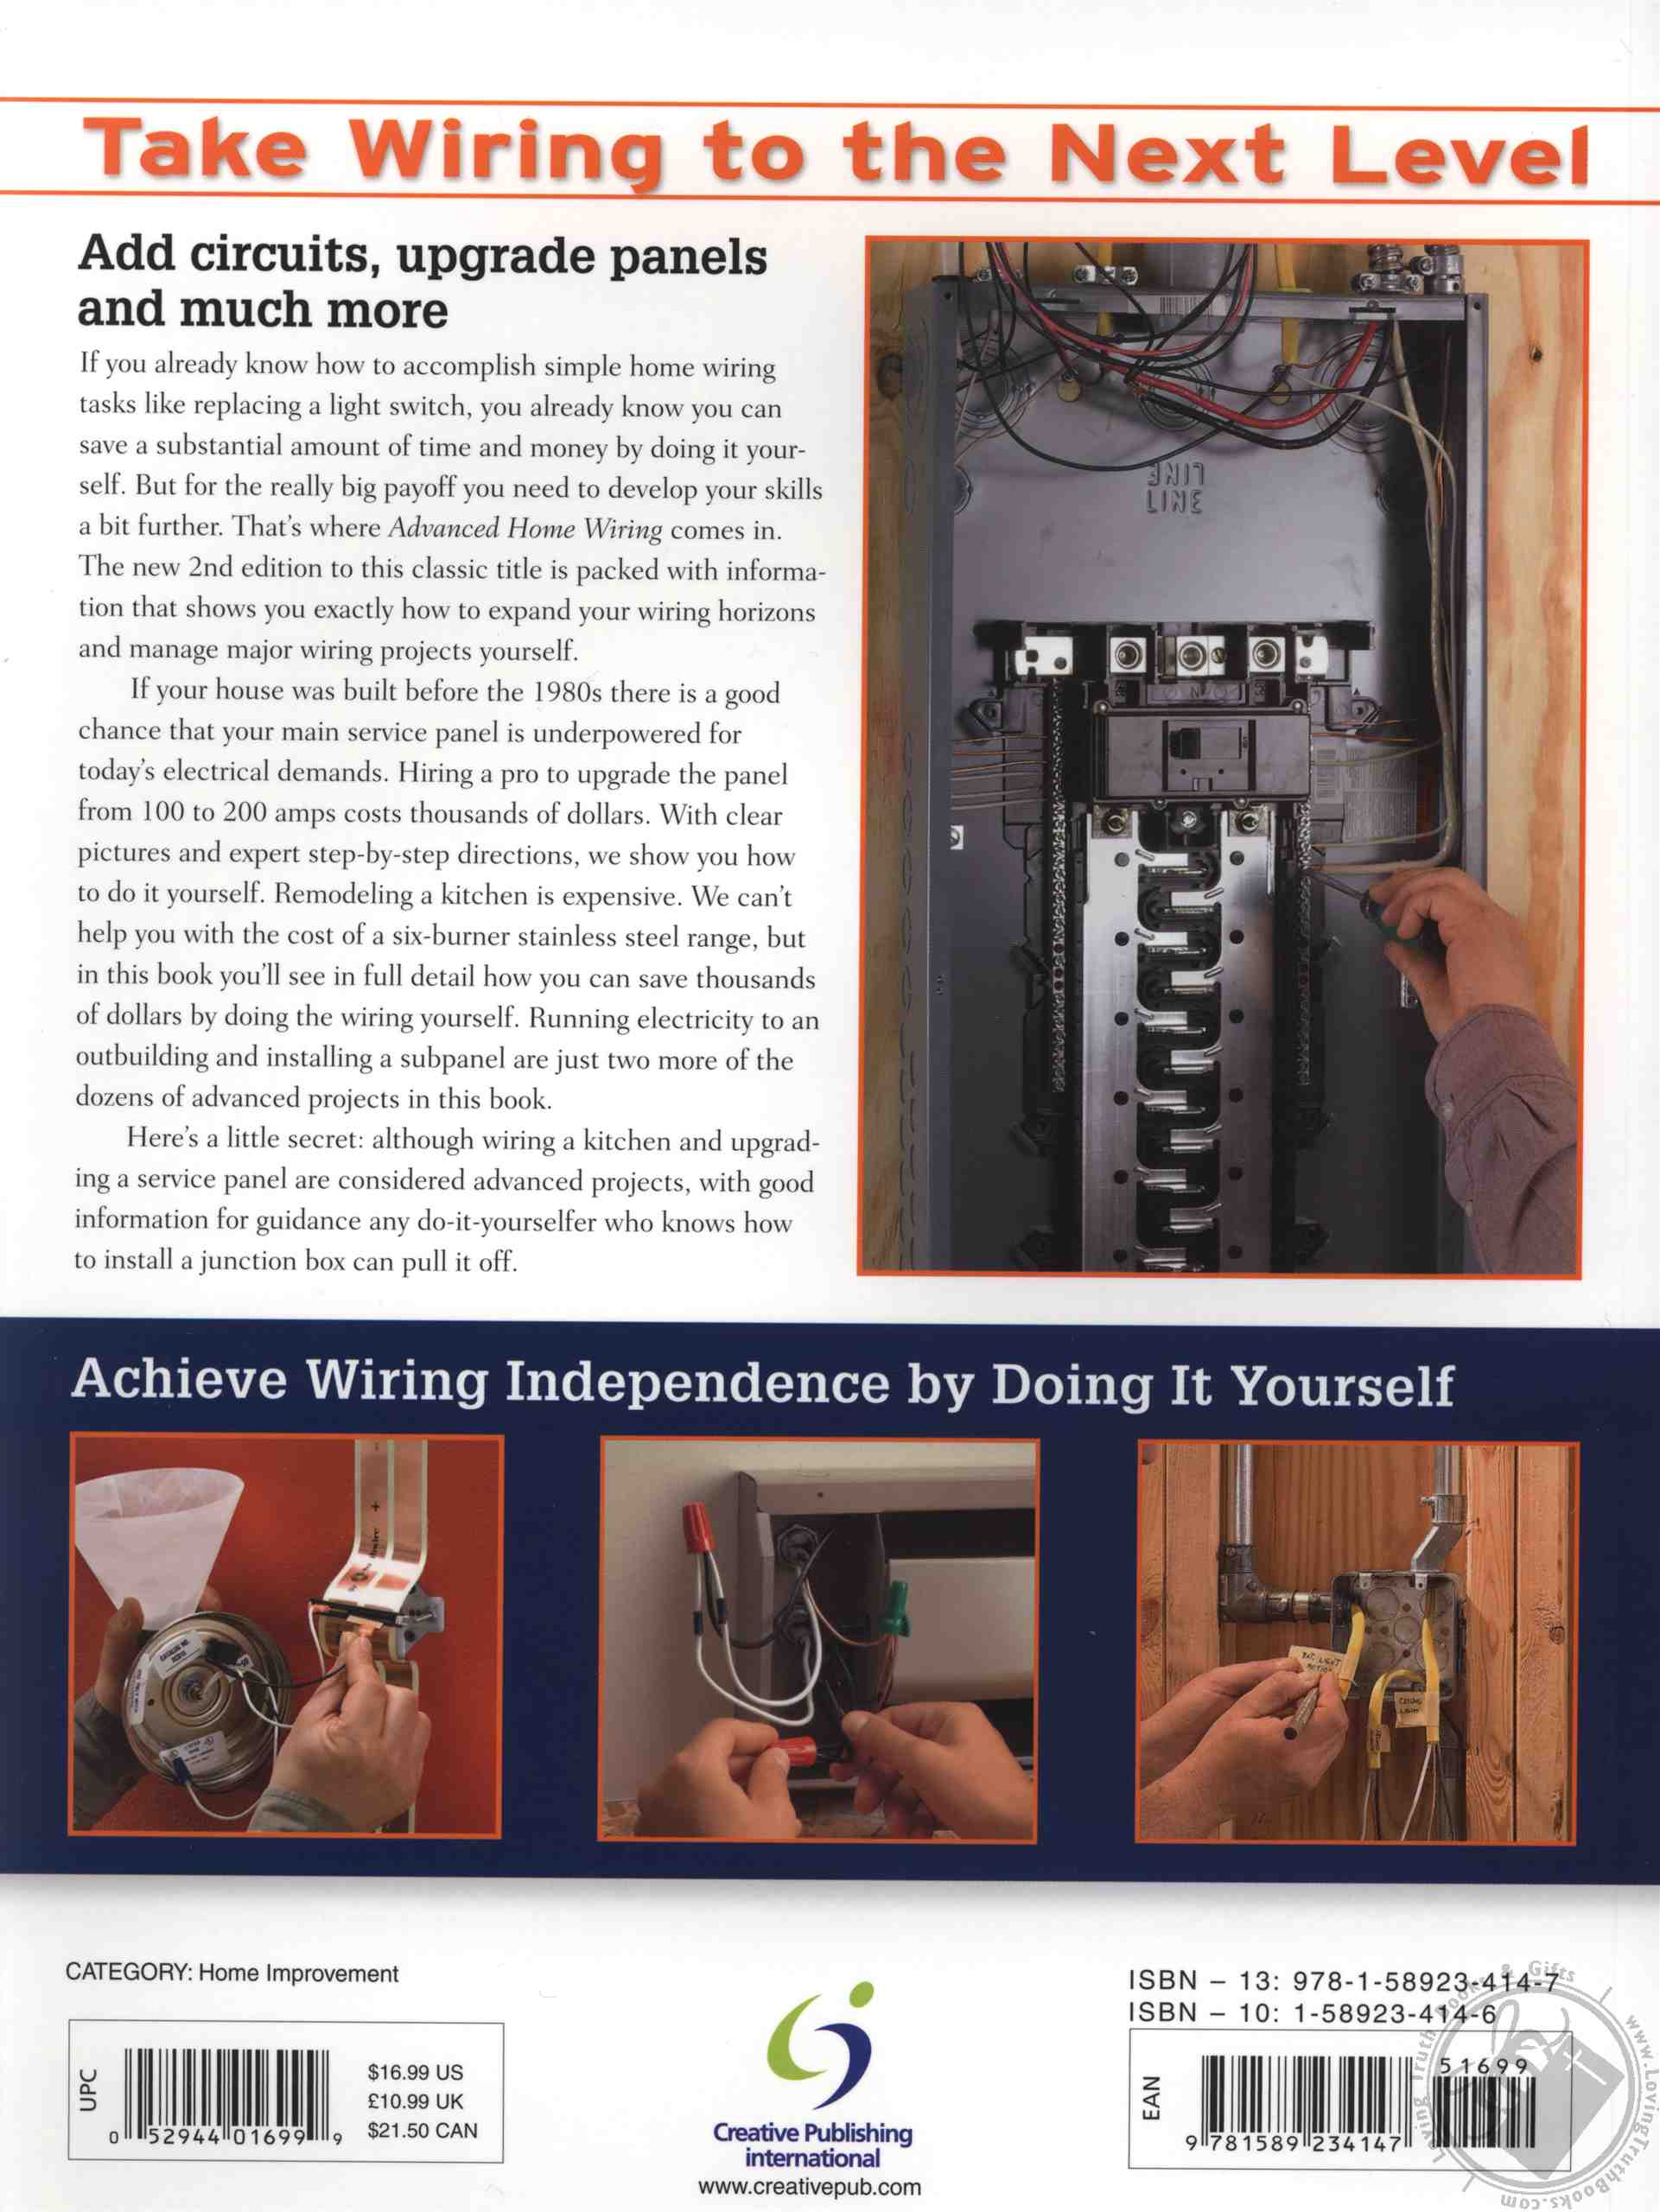 The Black & Decker Complete Guide to Home Wiring: Including Information on Home